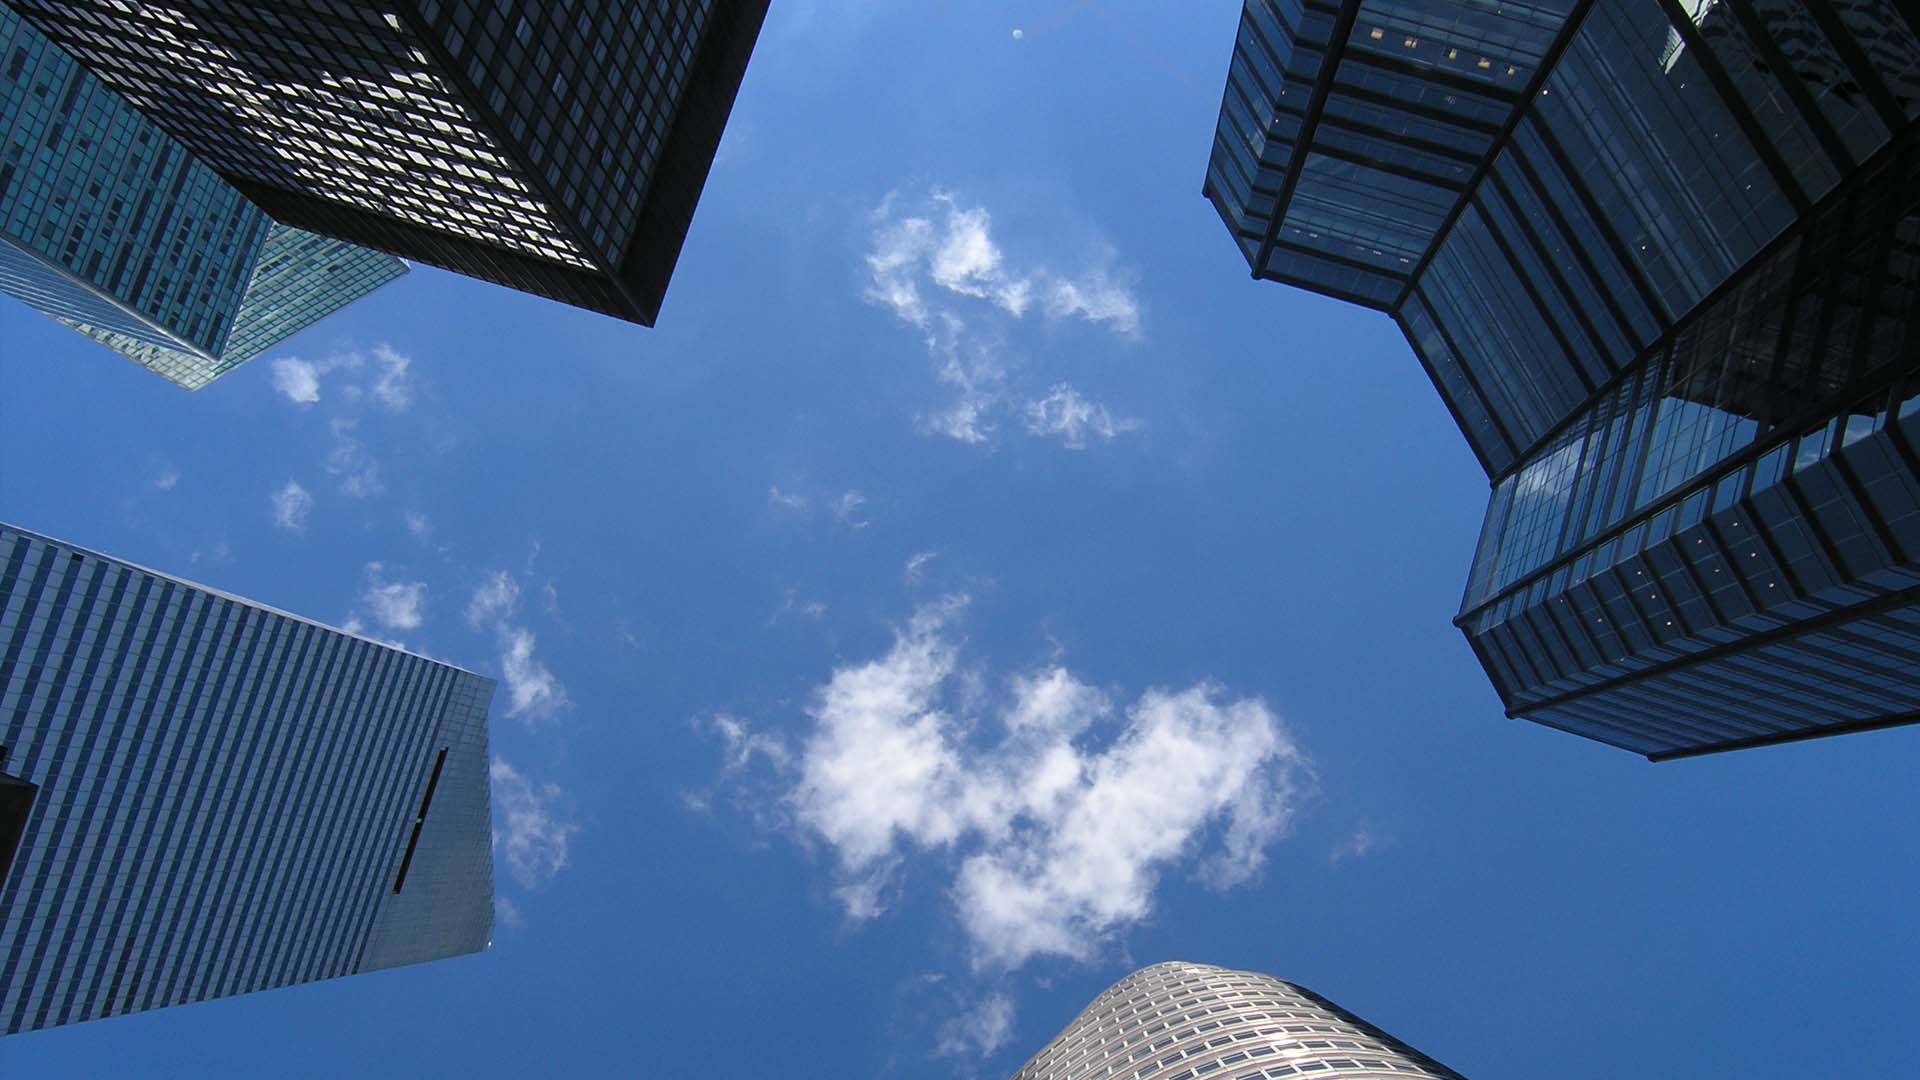 Citicorp building with clouds and sky